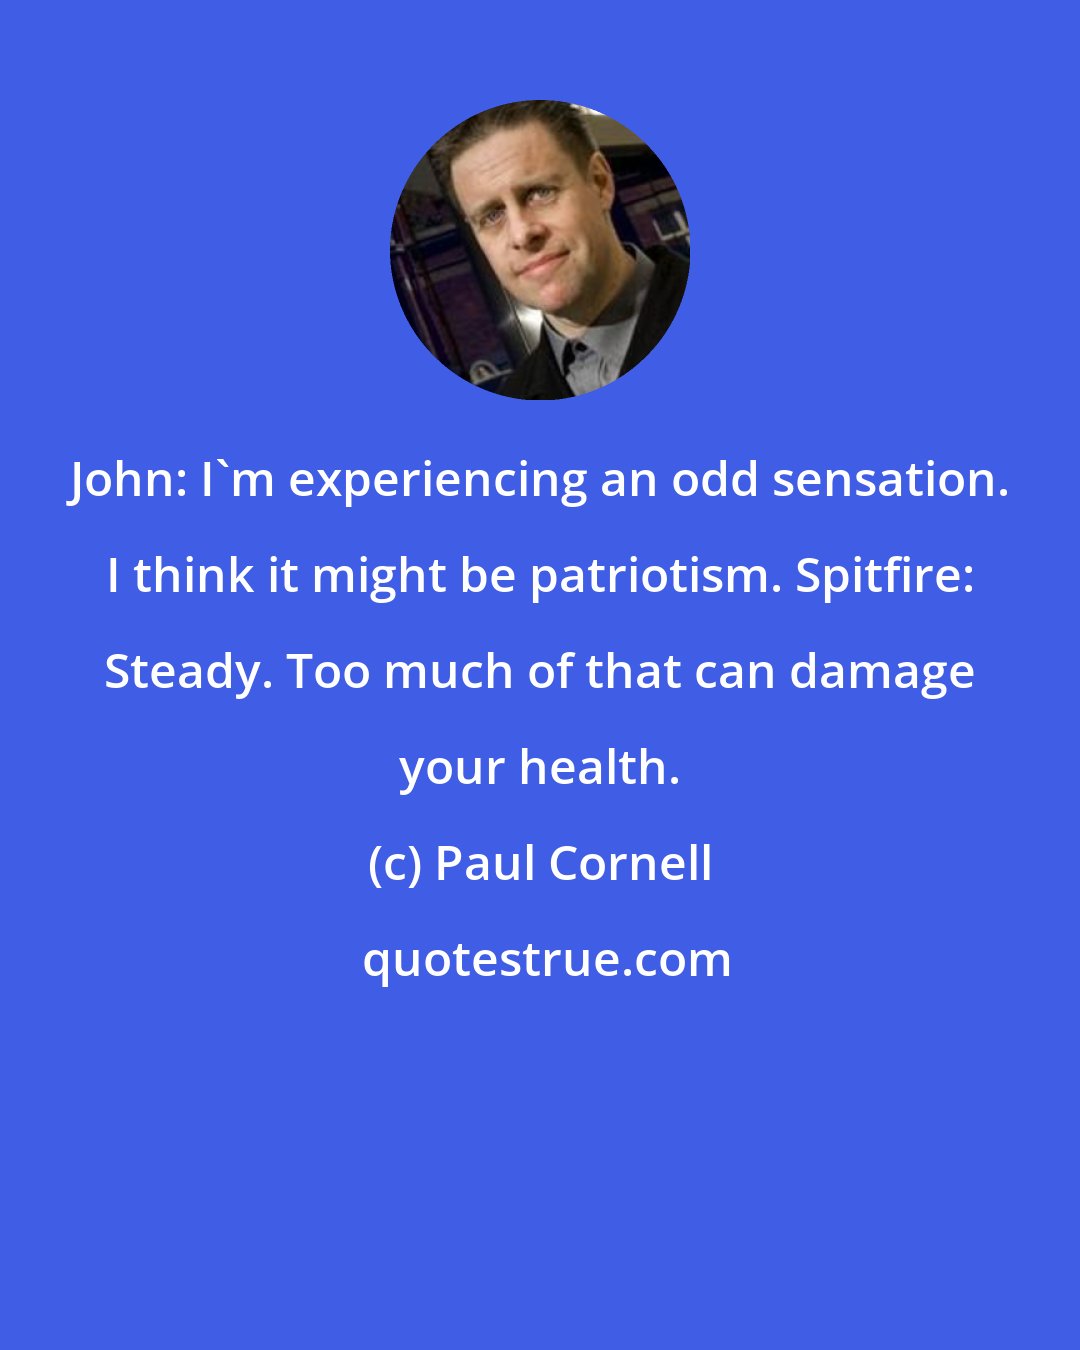 Paul Cornell: John: I'm experiencing an odd sensation. I think it might be patriotism. Spitfire: Steady. Too much of that can damage your health.